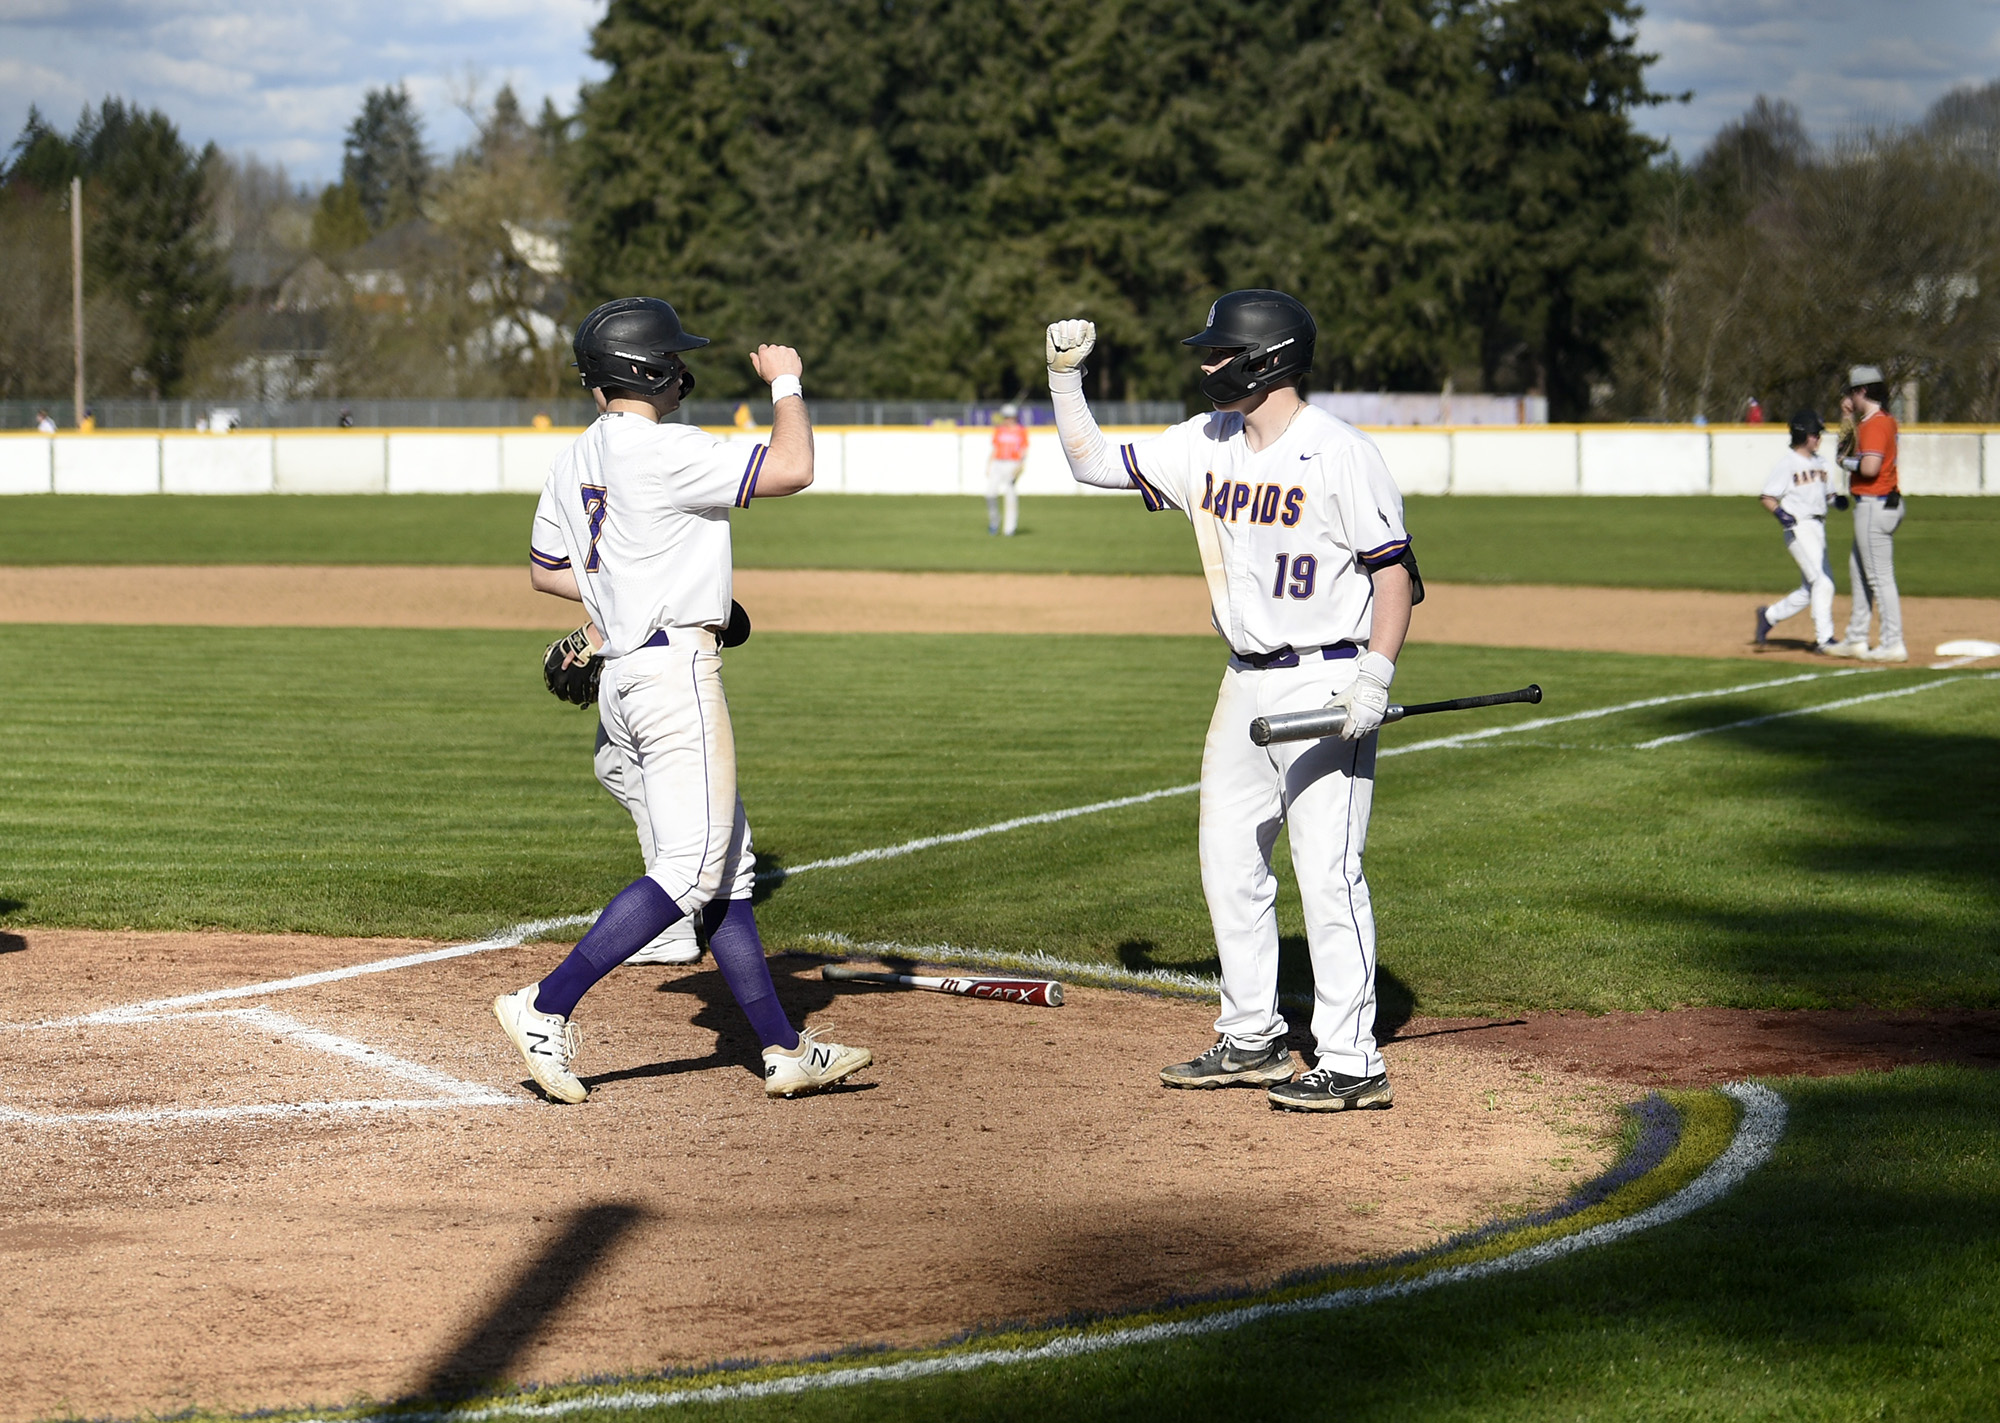 Columbia River’s Chris Parkin (7) is greeted by Zayne Boyes (19) after scoring on a single by Noah Larson during the Rapids' 6-3 win over Ridgefield in a 2A Greater St. Helens League baseball game at Columbia River on Friday, April 14, 2023.